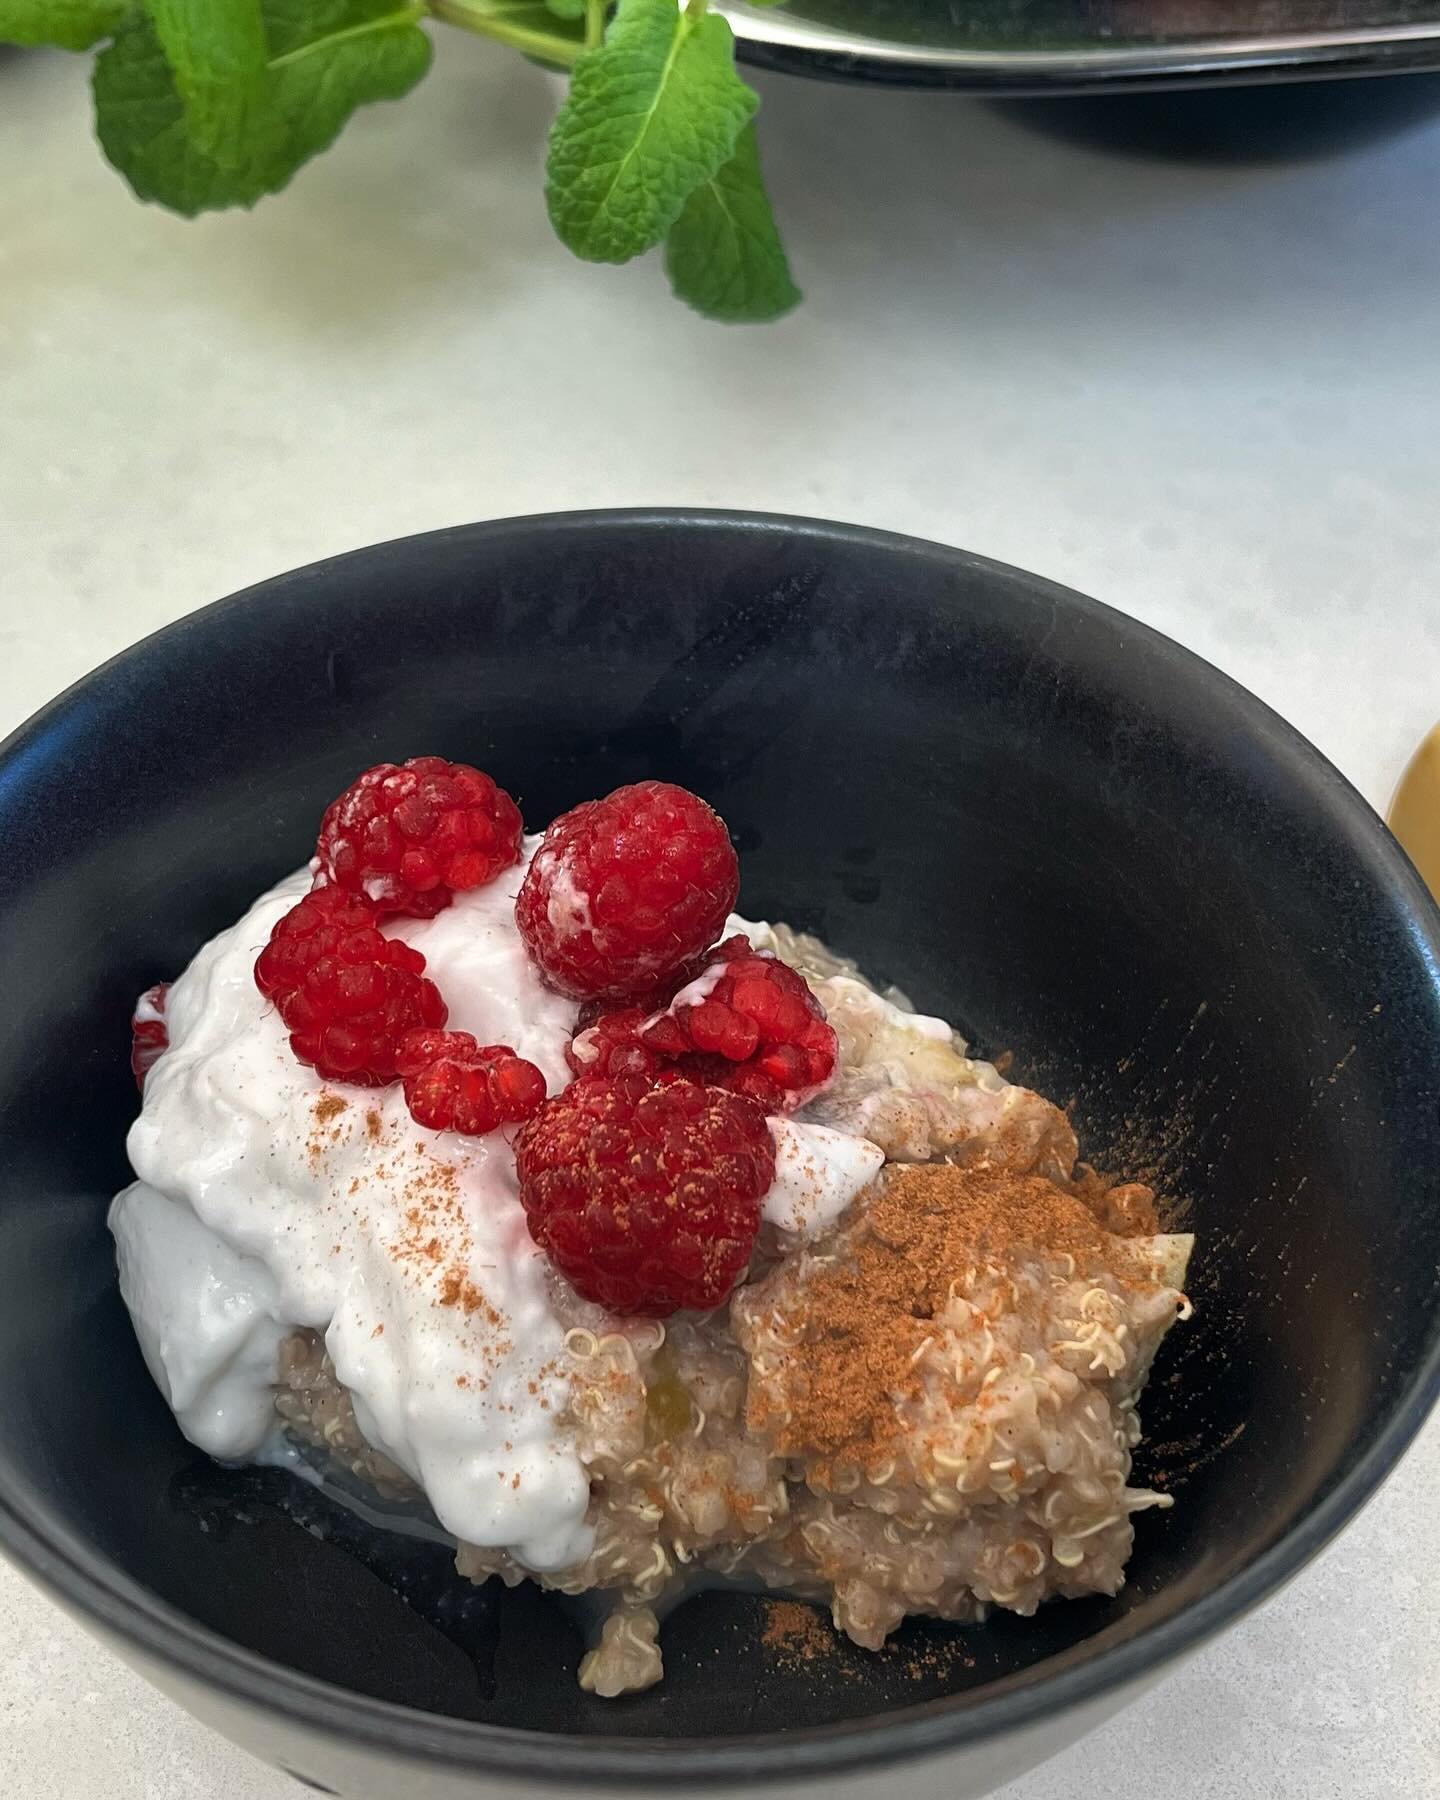 Ready for a great protein breakfast? Check my website blog for my favourite Quinoa Porridge recipe  #quinoarecipe #proteinbreakfast #balancebloodsugar #energydiet #healthy recipes #gluten free #magnesium #breakfast recipes